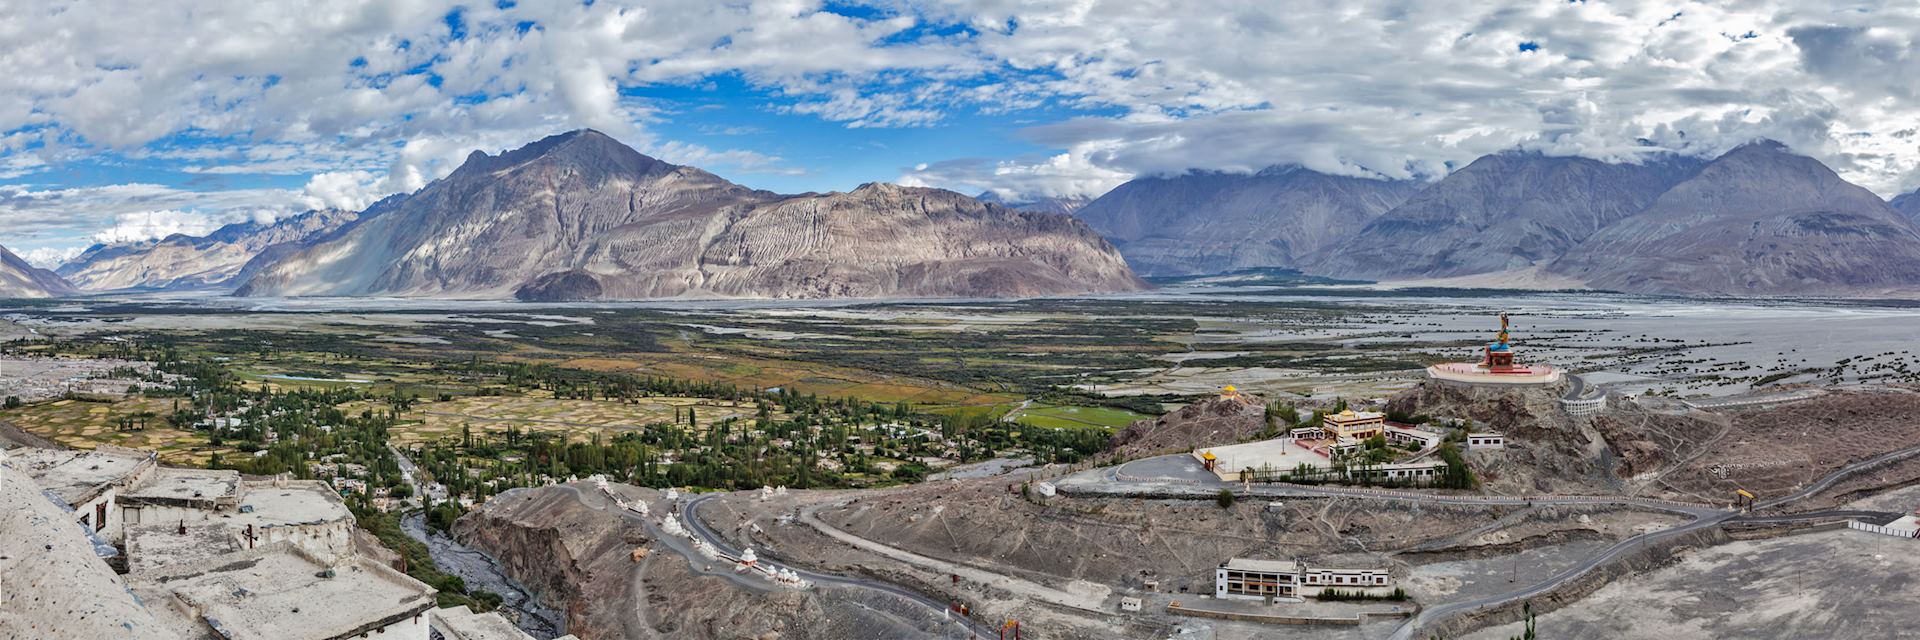 Visit Nubra Valley on a trip to India